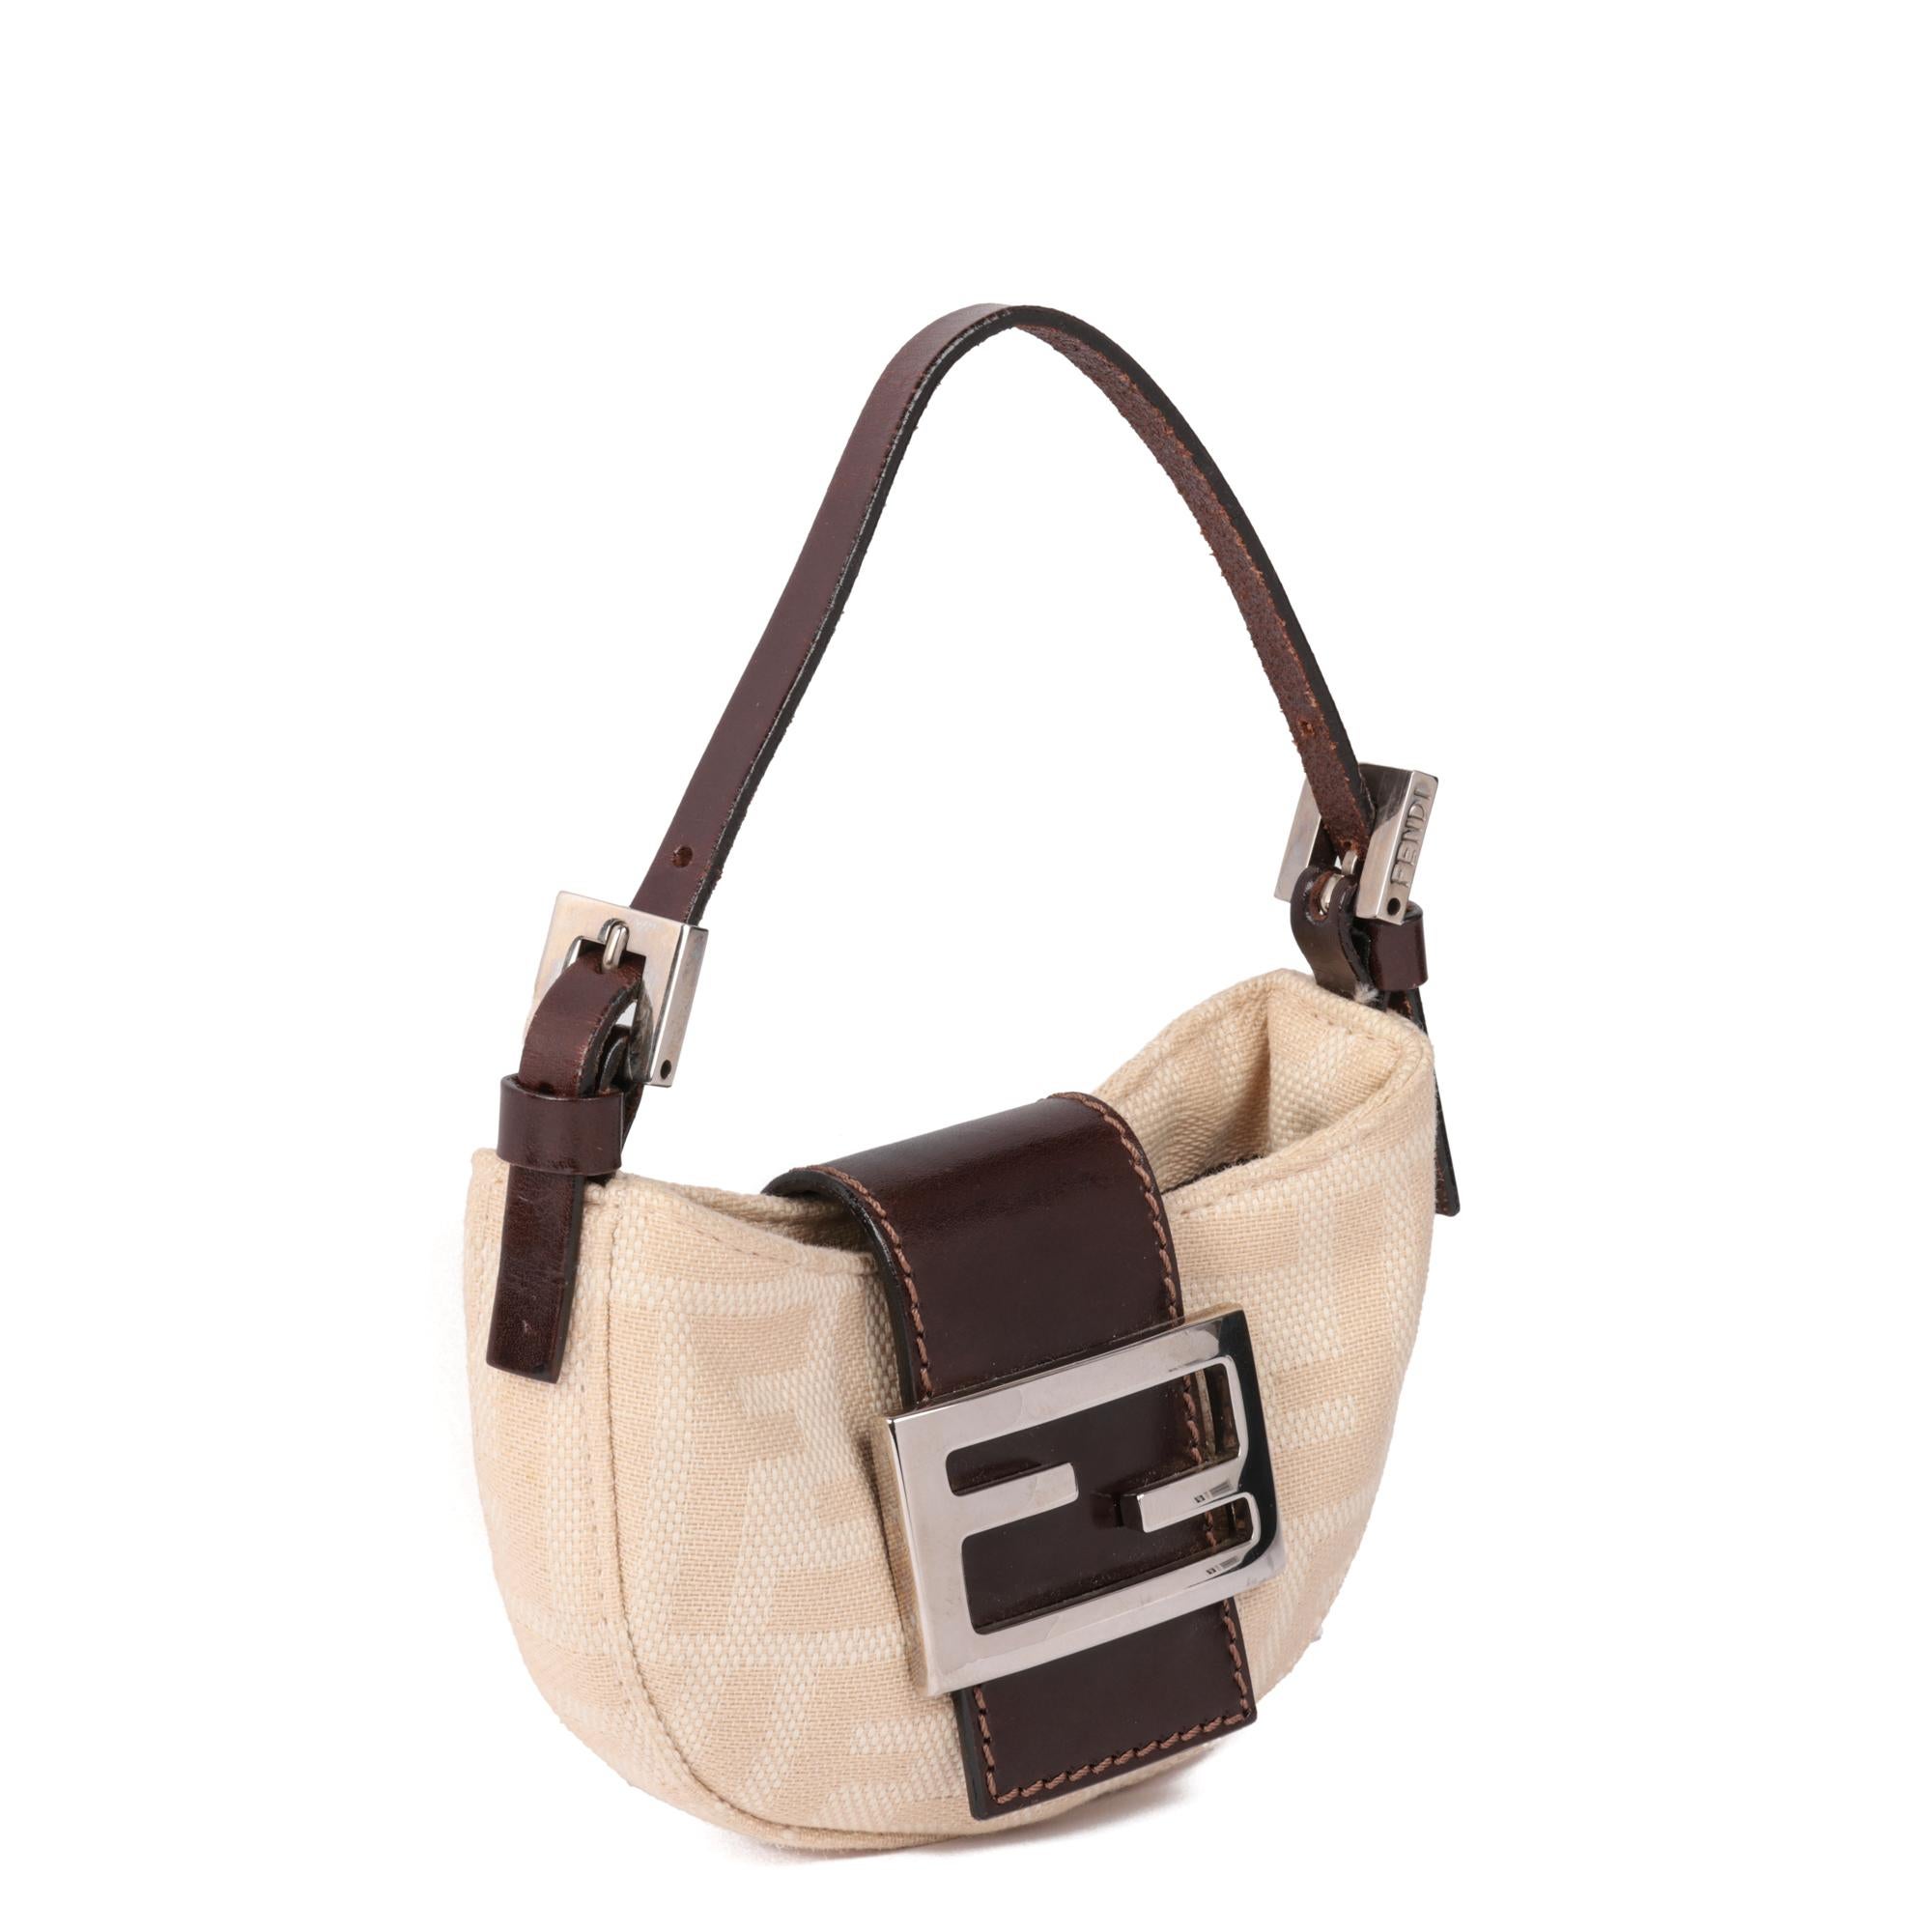 FENDI
Beige Zucca Canvas & Brown Calfskin Leather Vintage Nano Baguette

Xupes Reference: HB5094
Serial Number: 2308-26673-008
Age (Circa): 2000
Accompanied By: Fendi Dust Bag
Gender: Ladies
Type: Top Handle

Colour: Beige
Hardware: